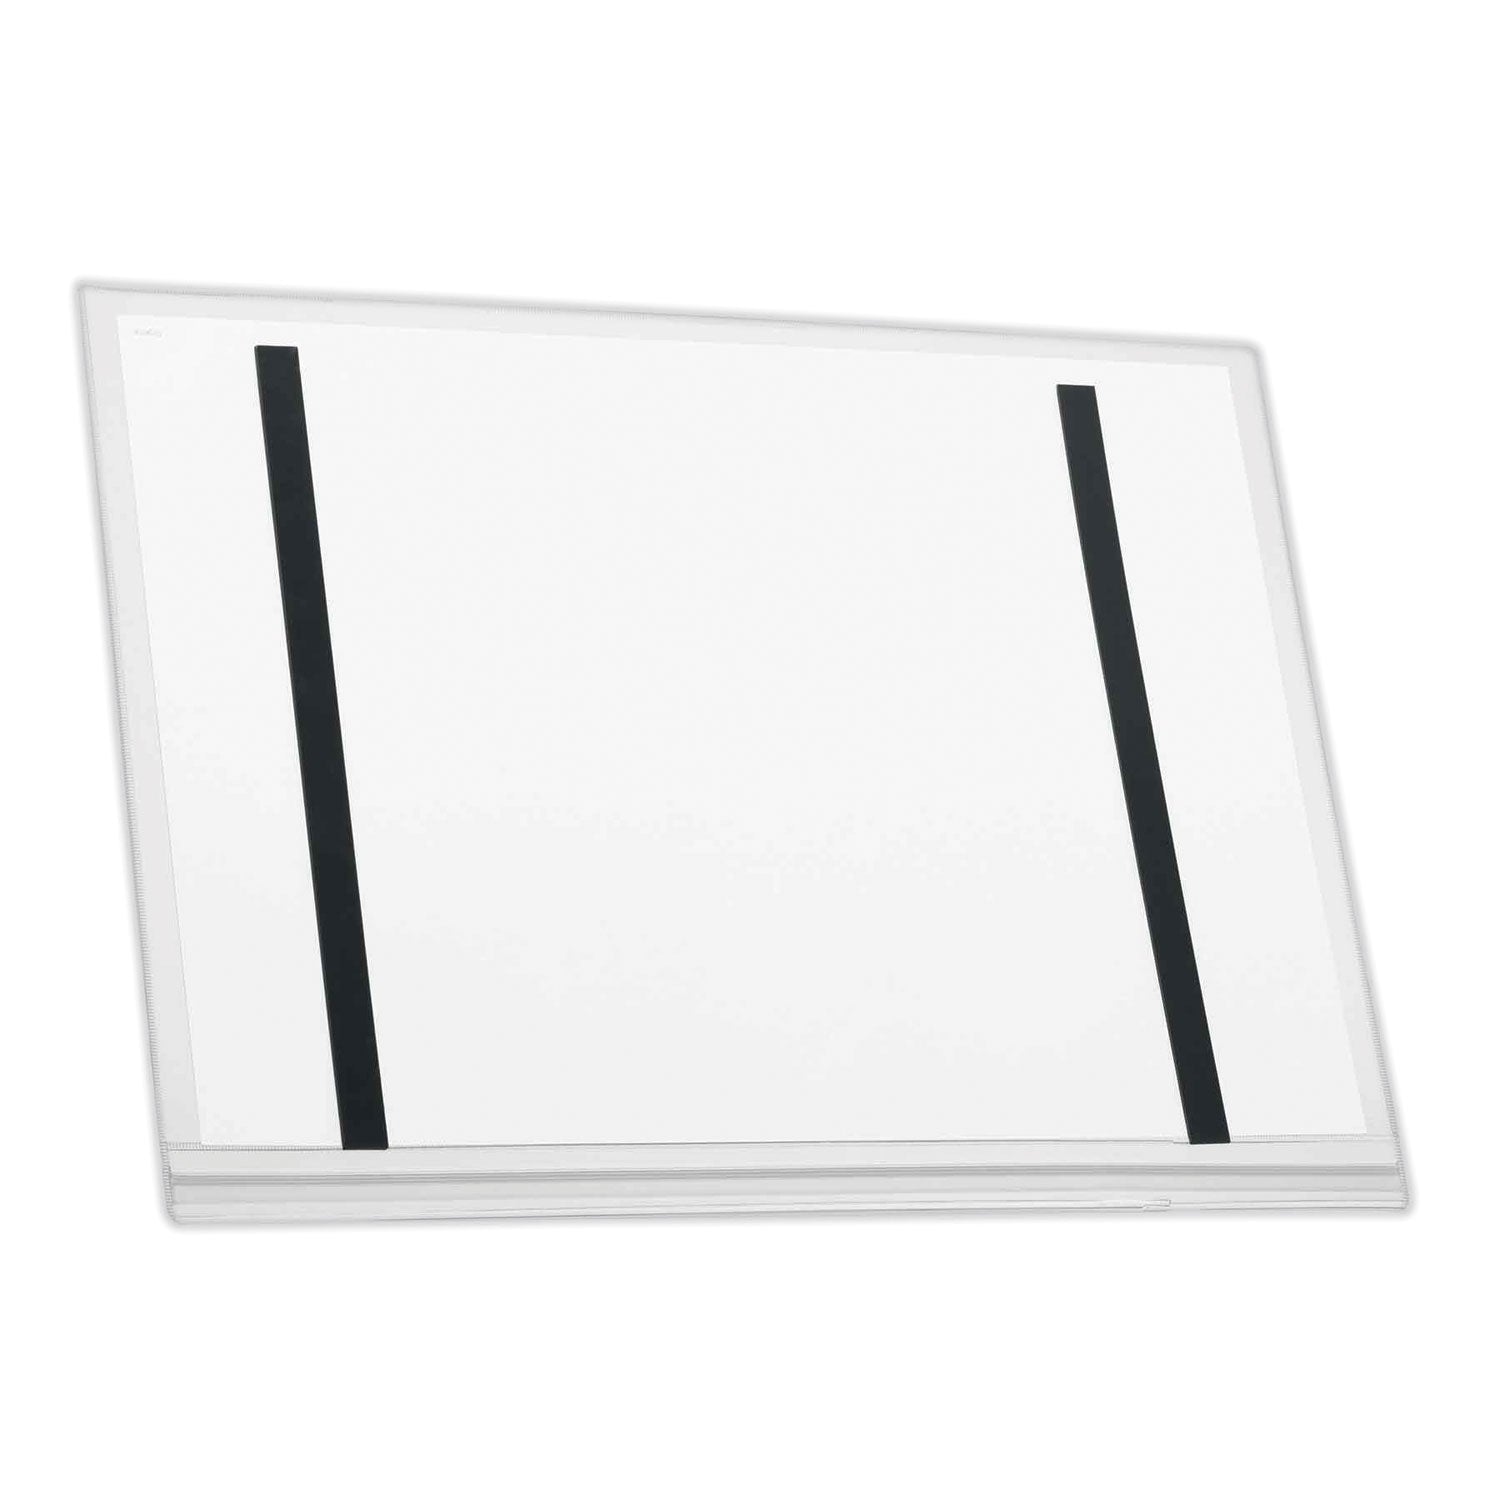 magnetic-water-resistant-sign-holder-11-x-17-clear-frame-5-pack_dbl501919 - 2